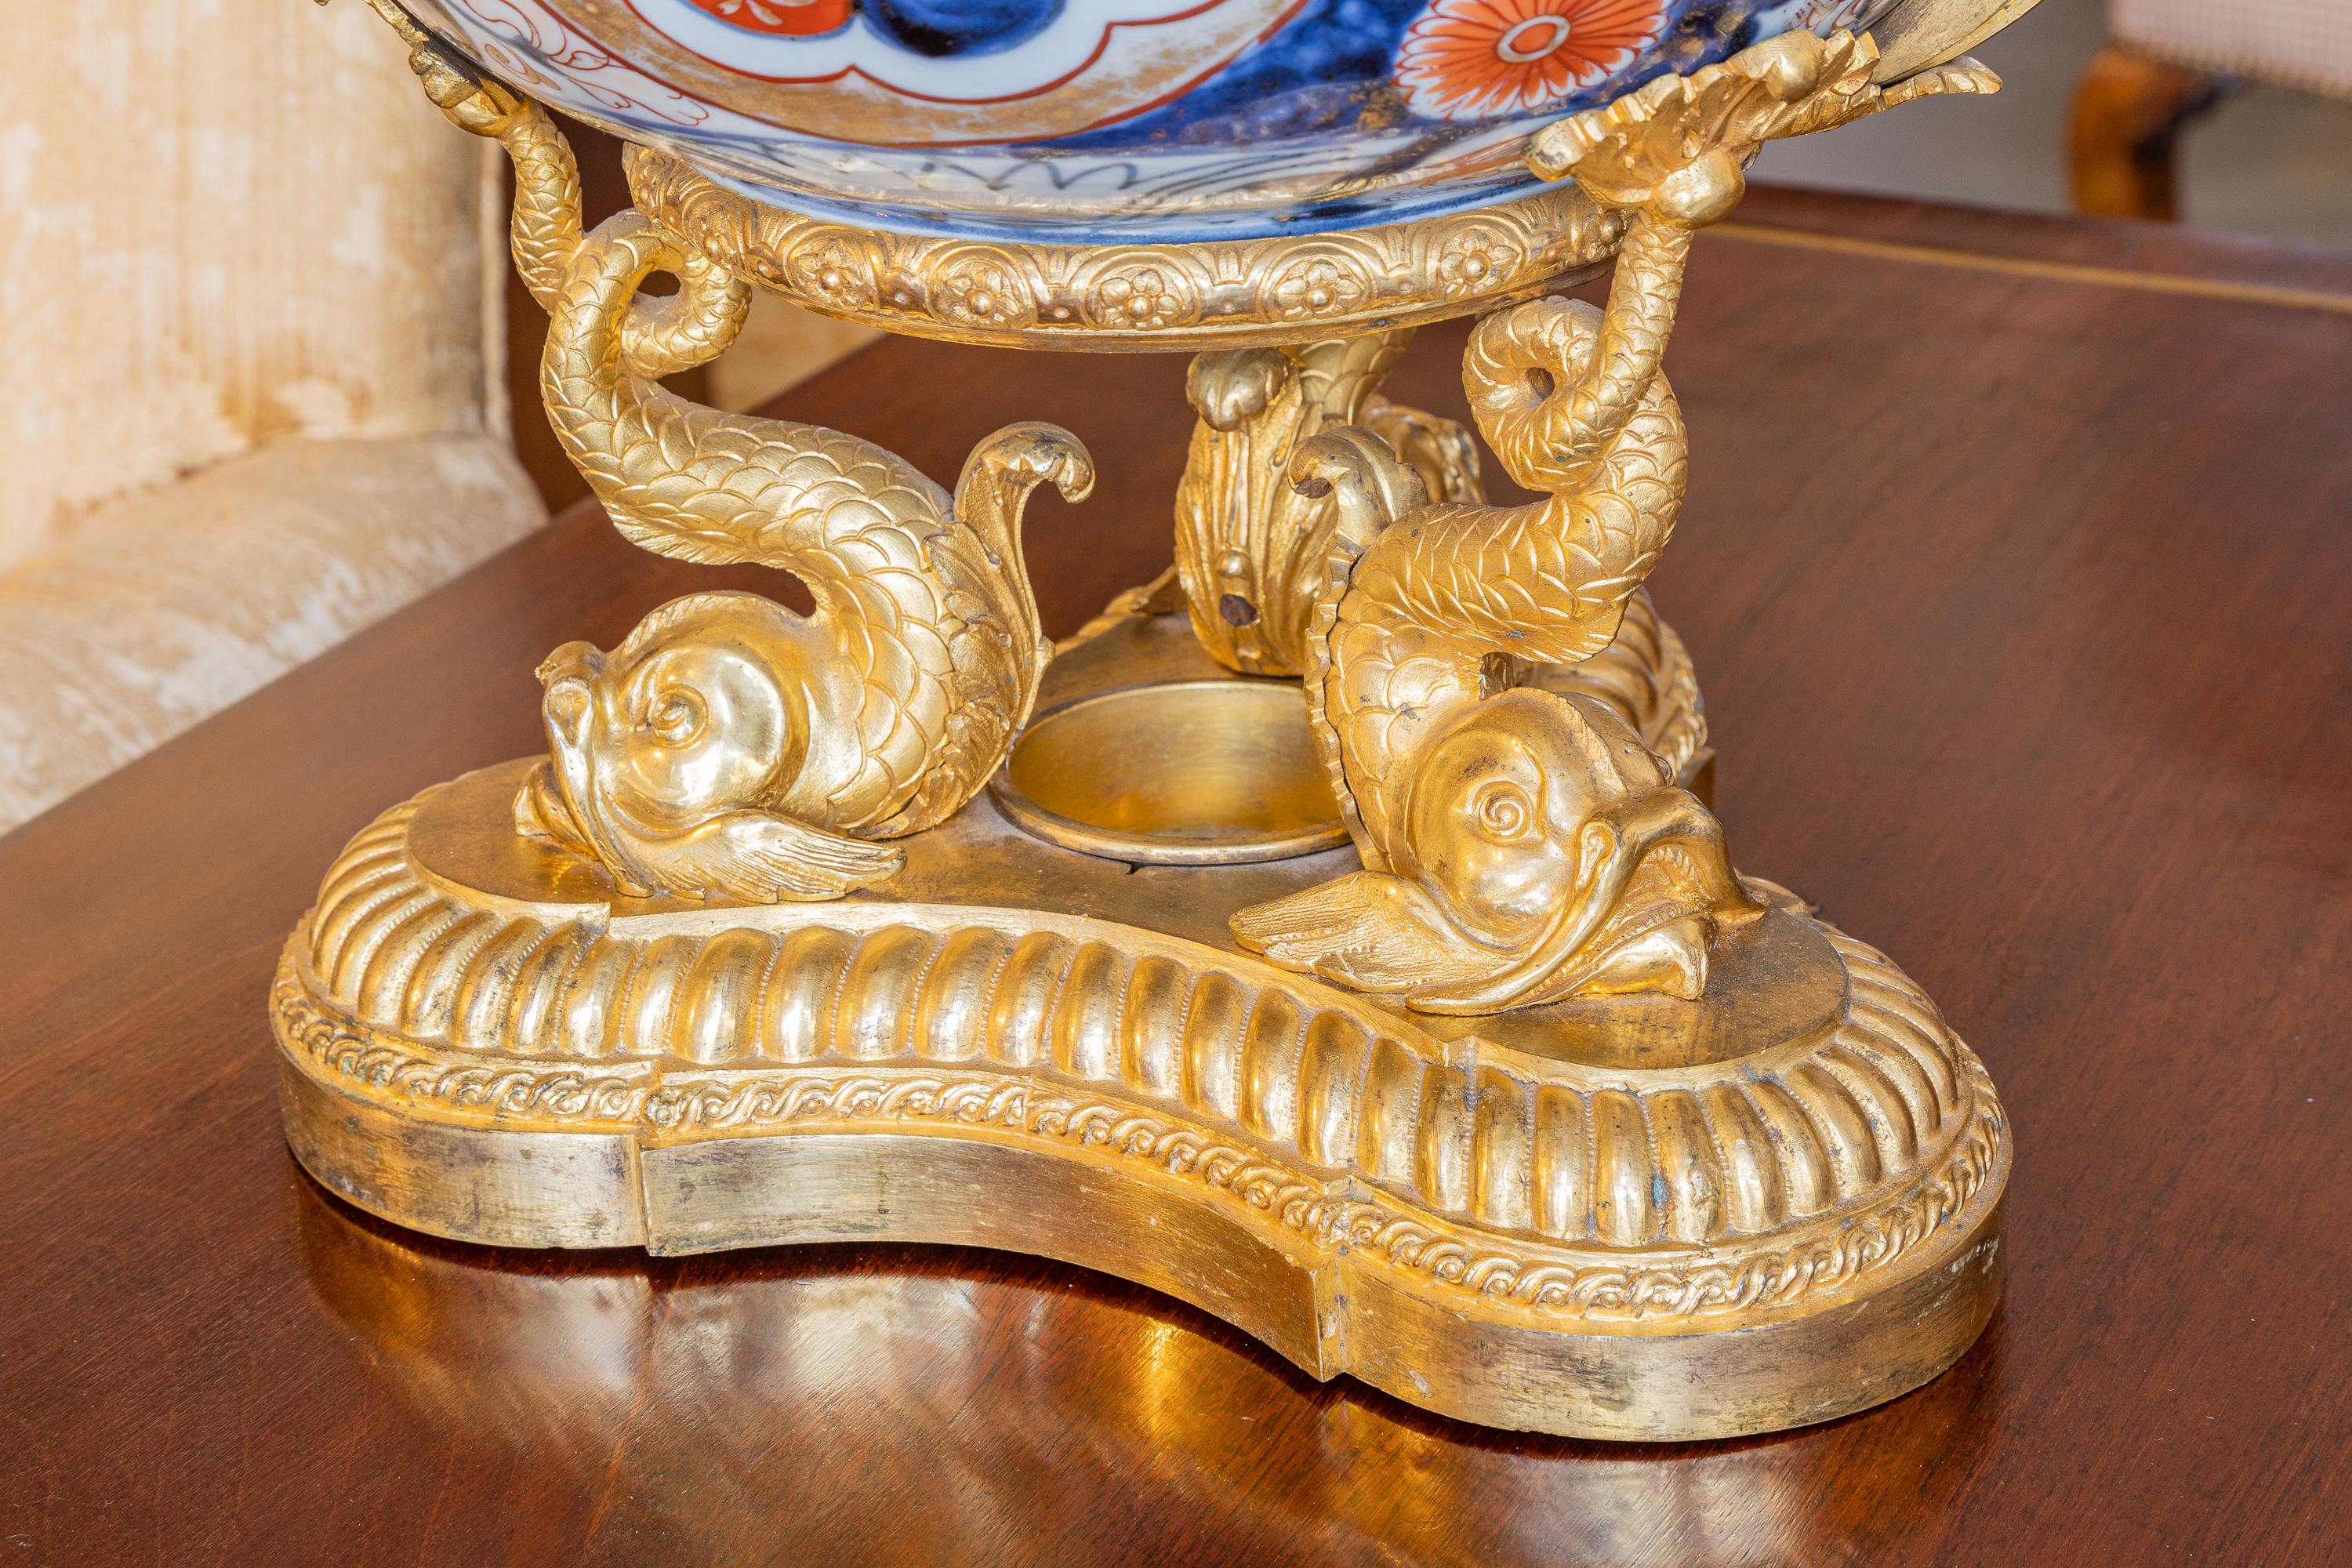 A fine and large 19th century French gilt bronze mounted centerpiece with a Imari porcelain decorated bowl. Fine quality.